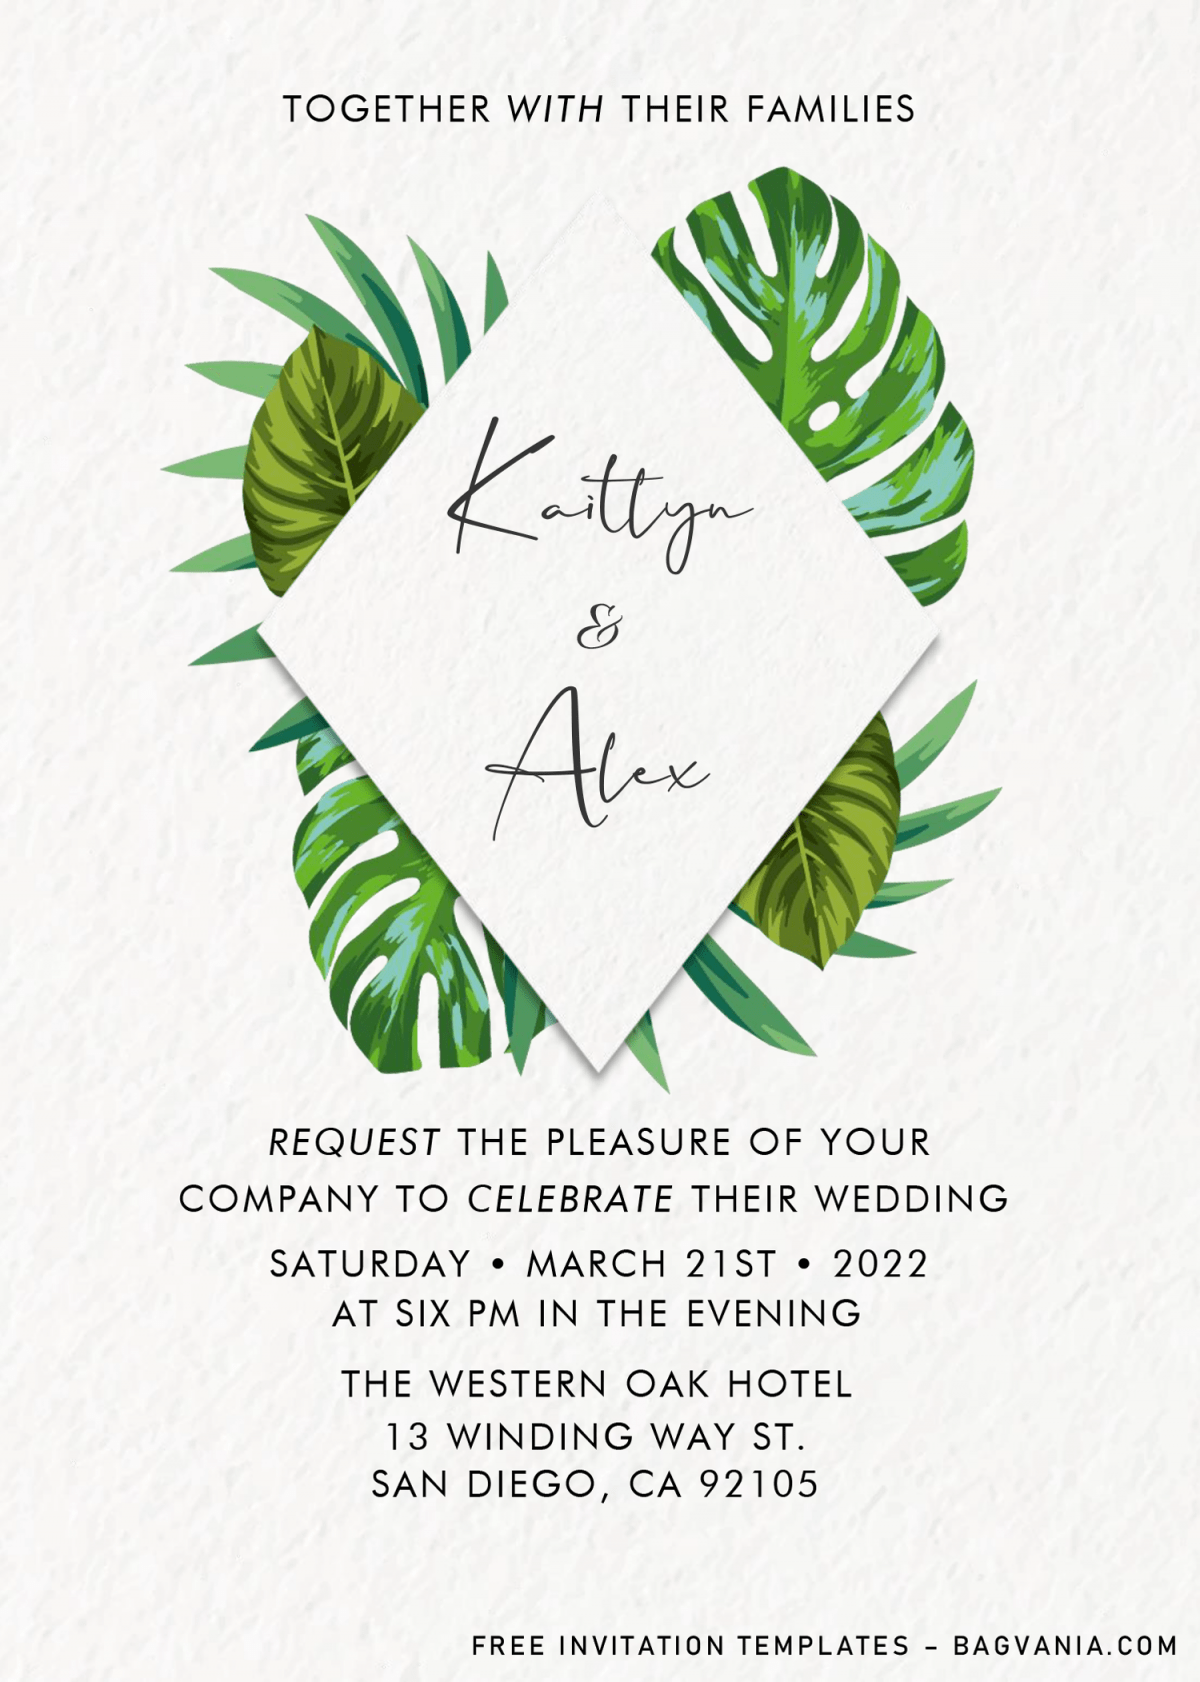 Classy Tropical Invitation Templates - Editable .Docx and has green leaves decorations